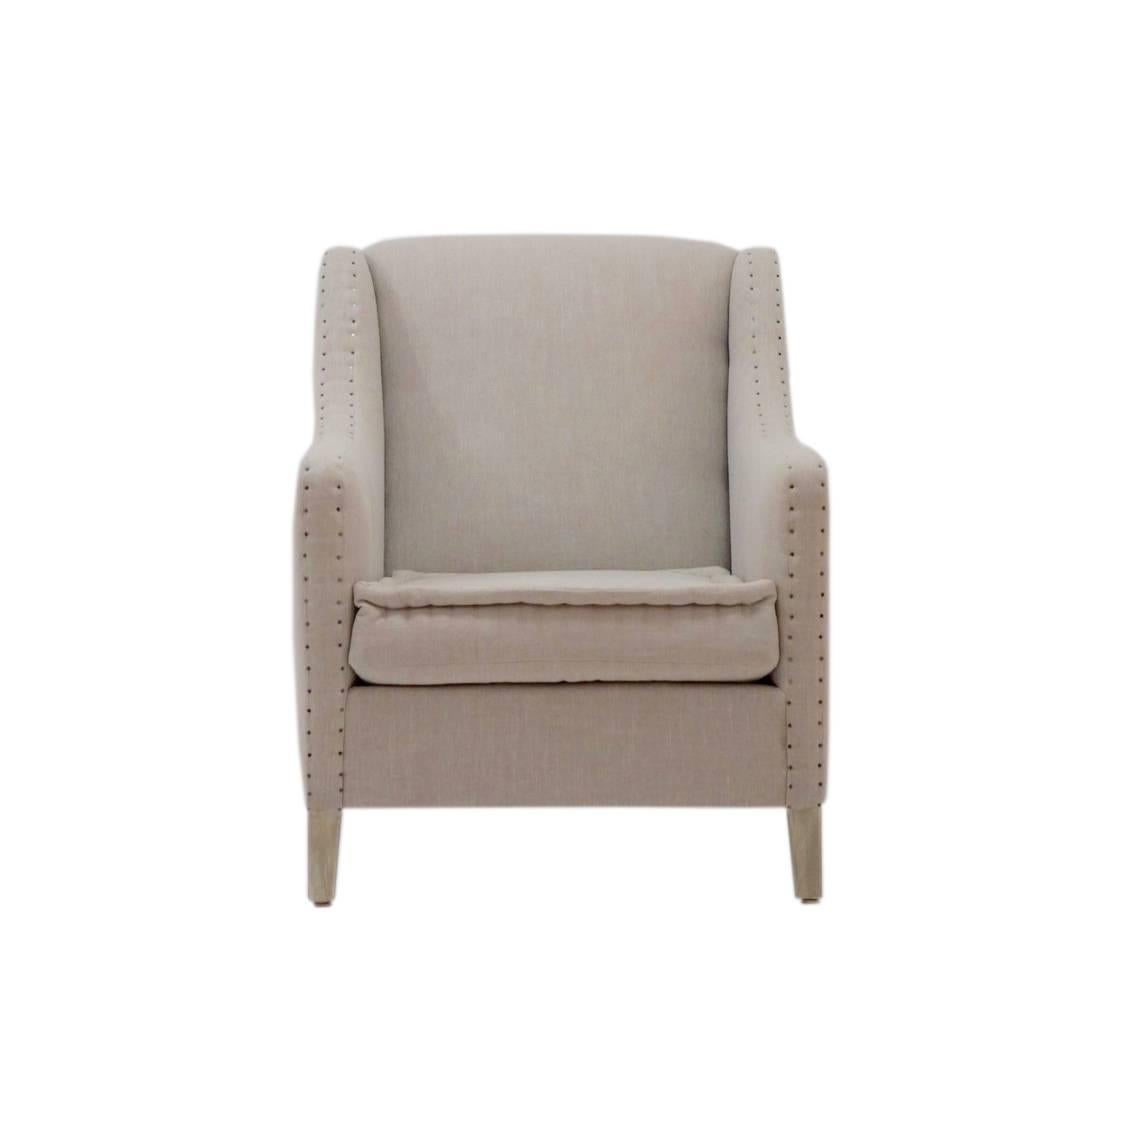 Snuggle up with a book in this comfortable club chair with colchon cushion. Handmade by us in Norwalk, Connecticut.